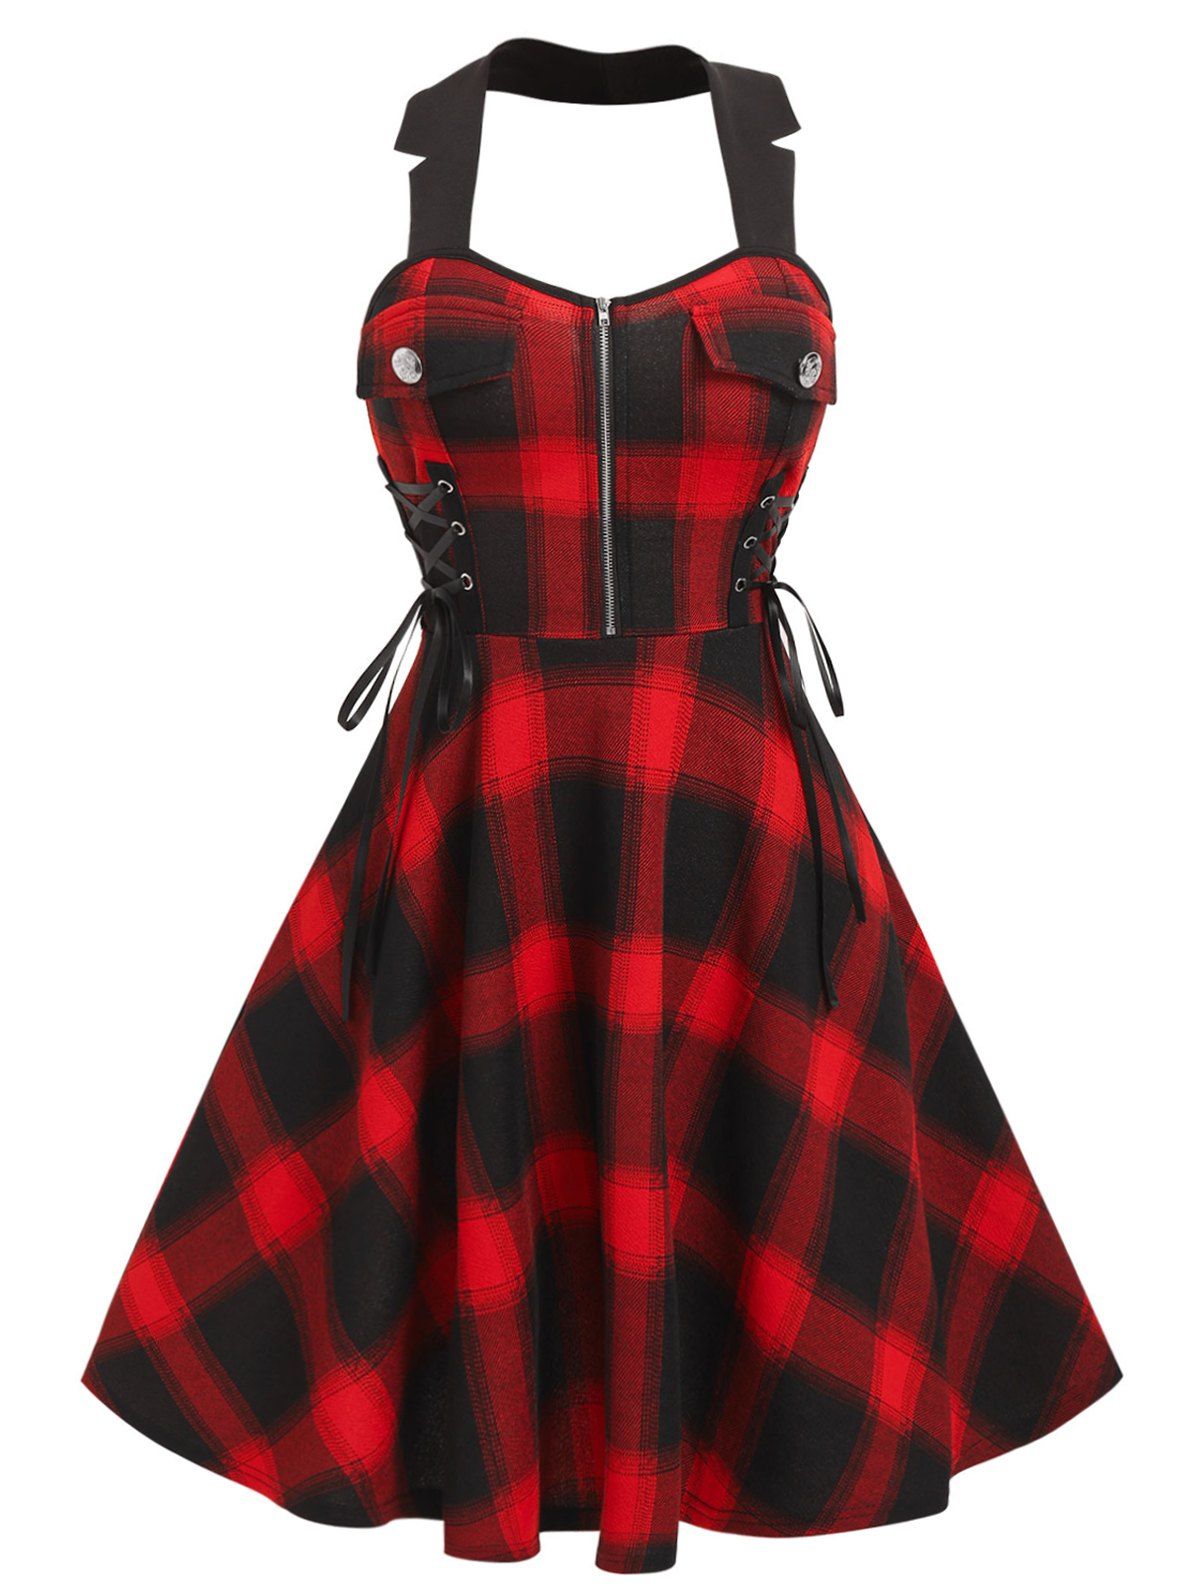 Vintage Plaid Checked Lace Up Corset Style Zip Flare Dress - RED L